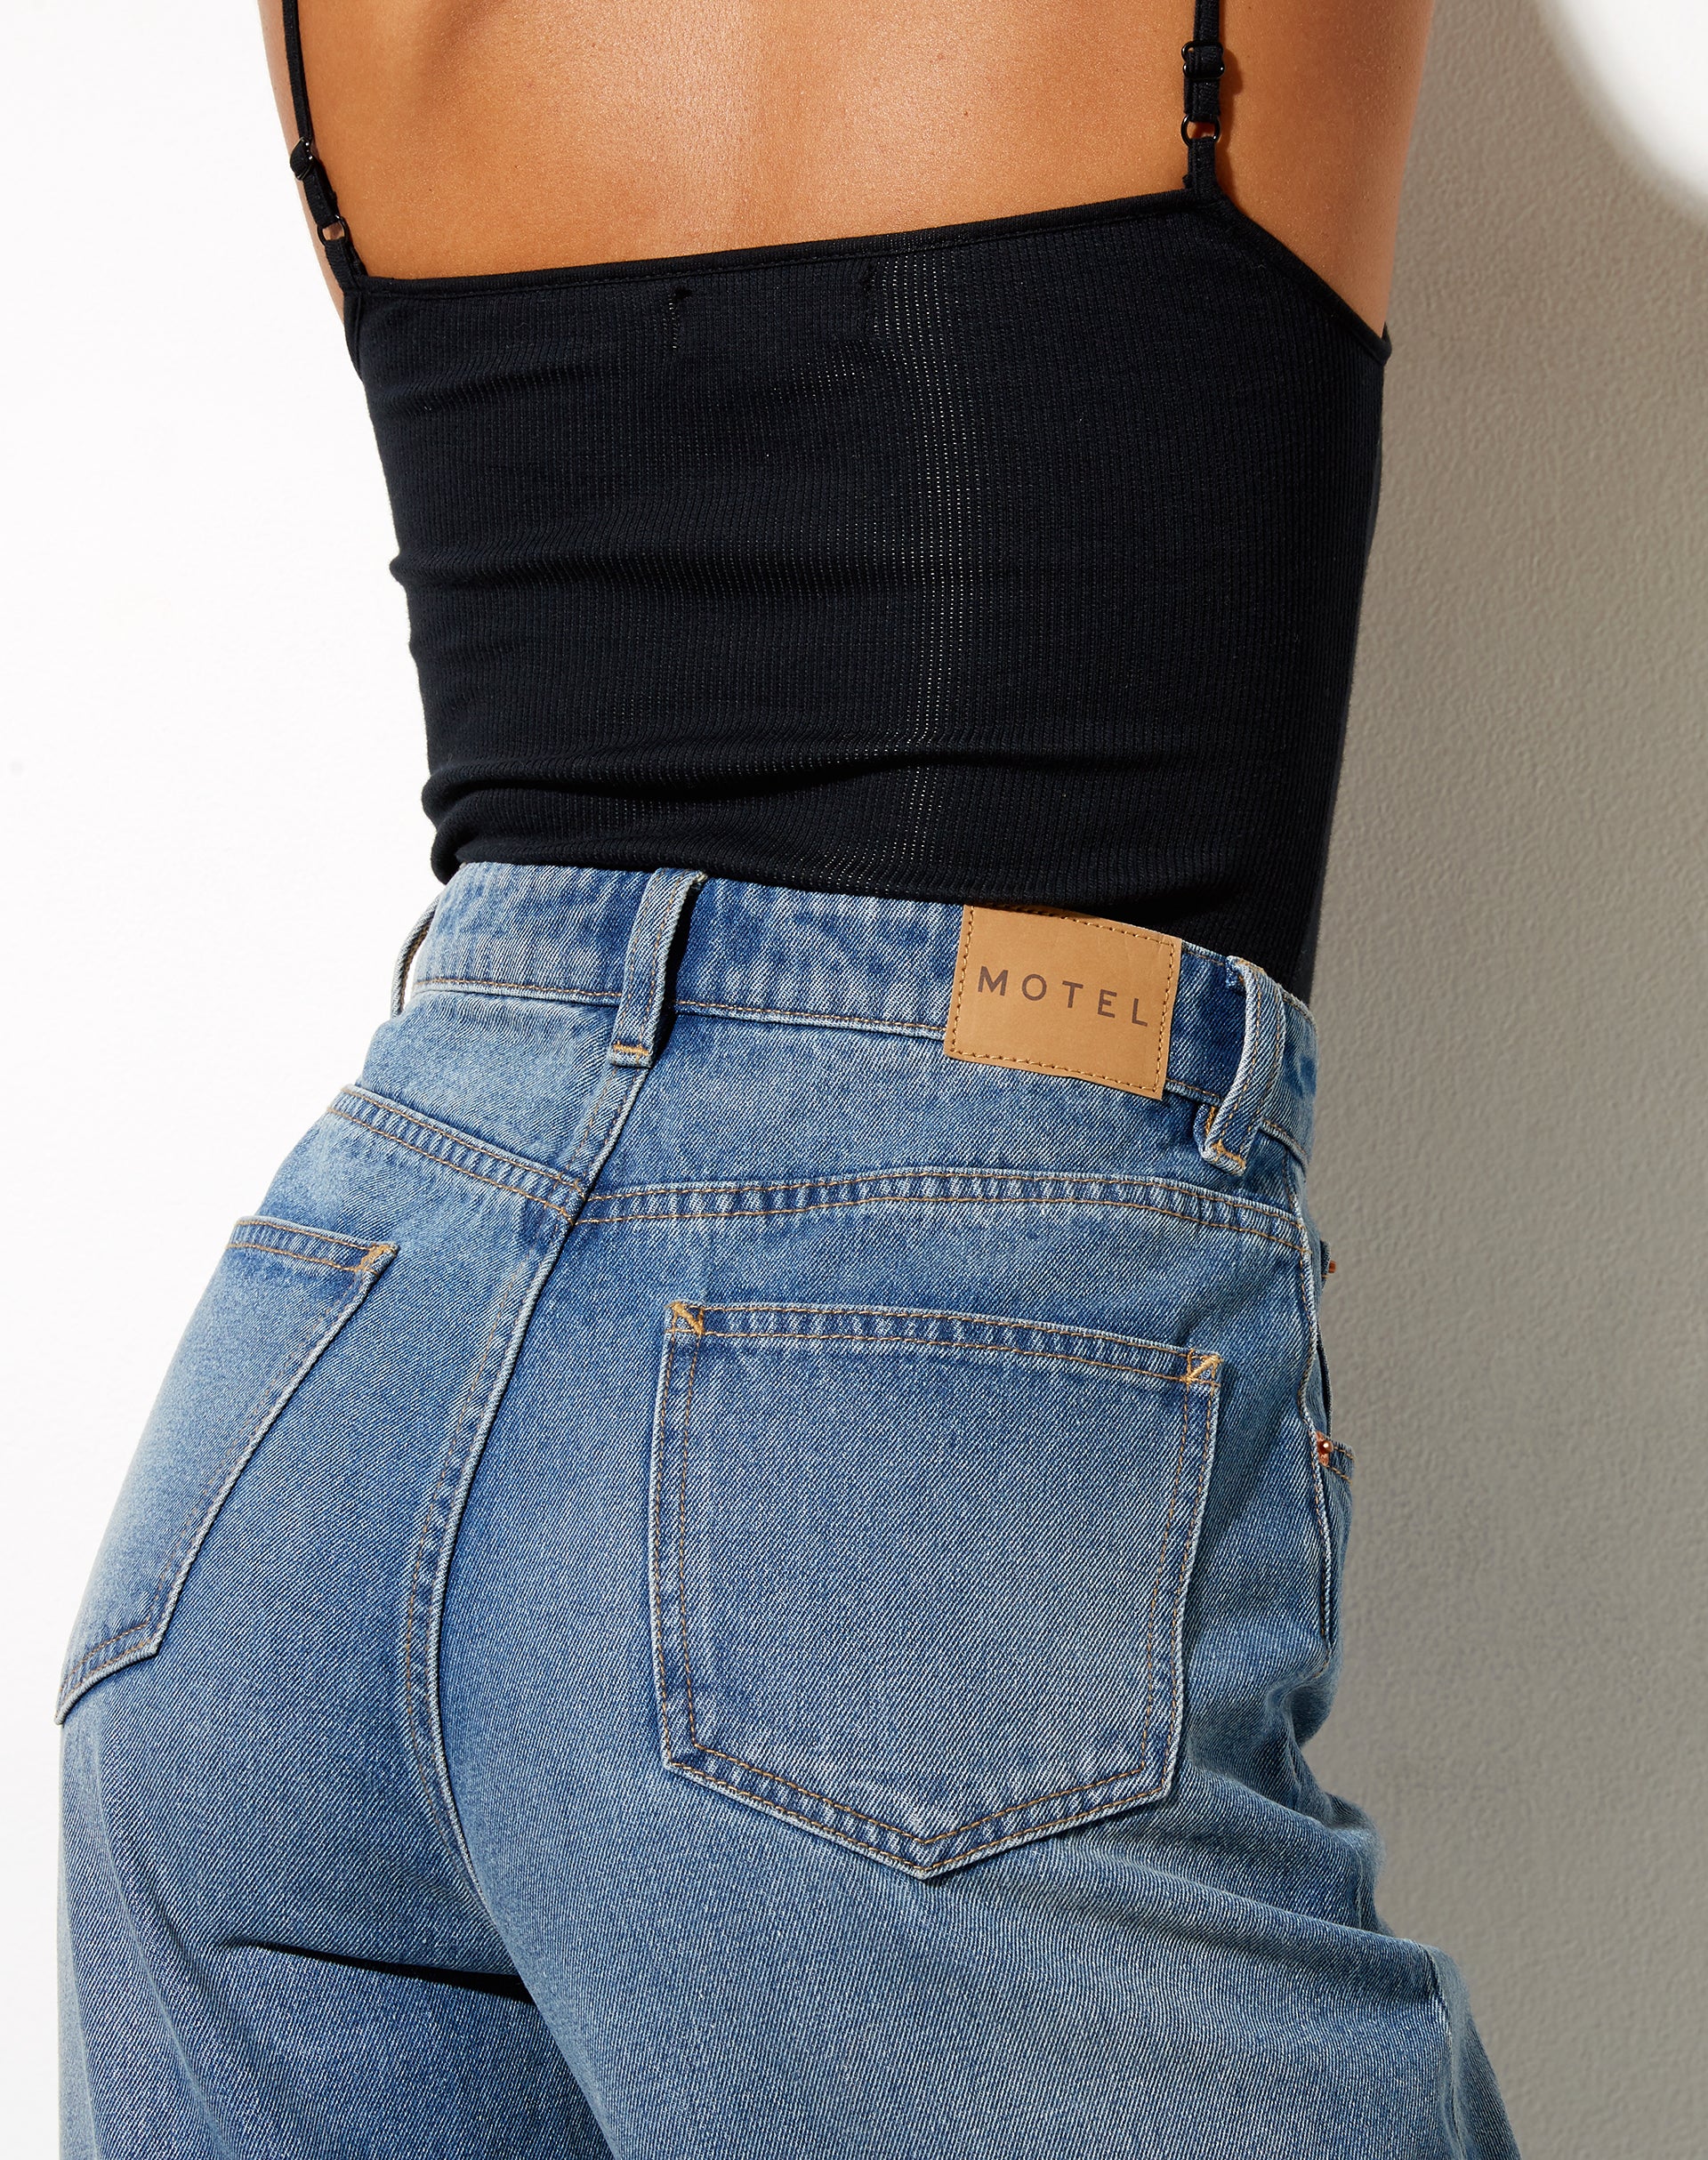 Image of Flare Parallel Jeans in Mid Wash